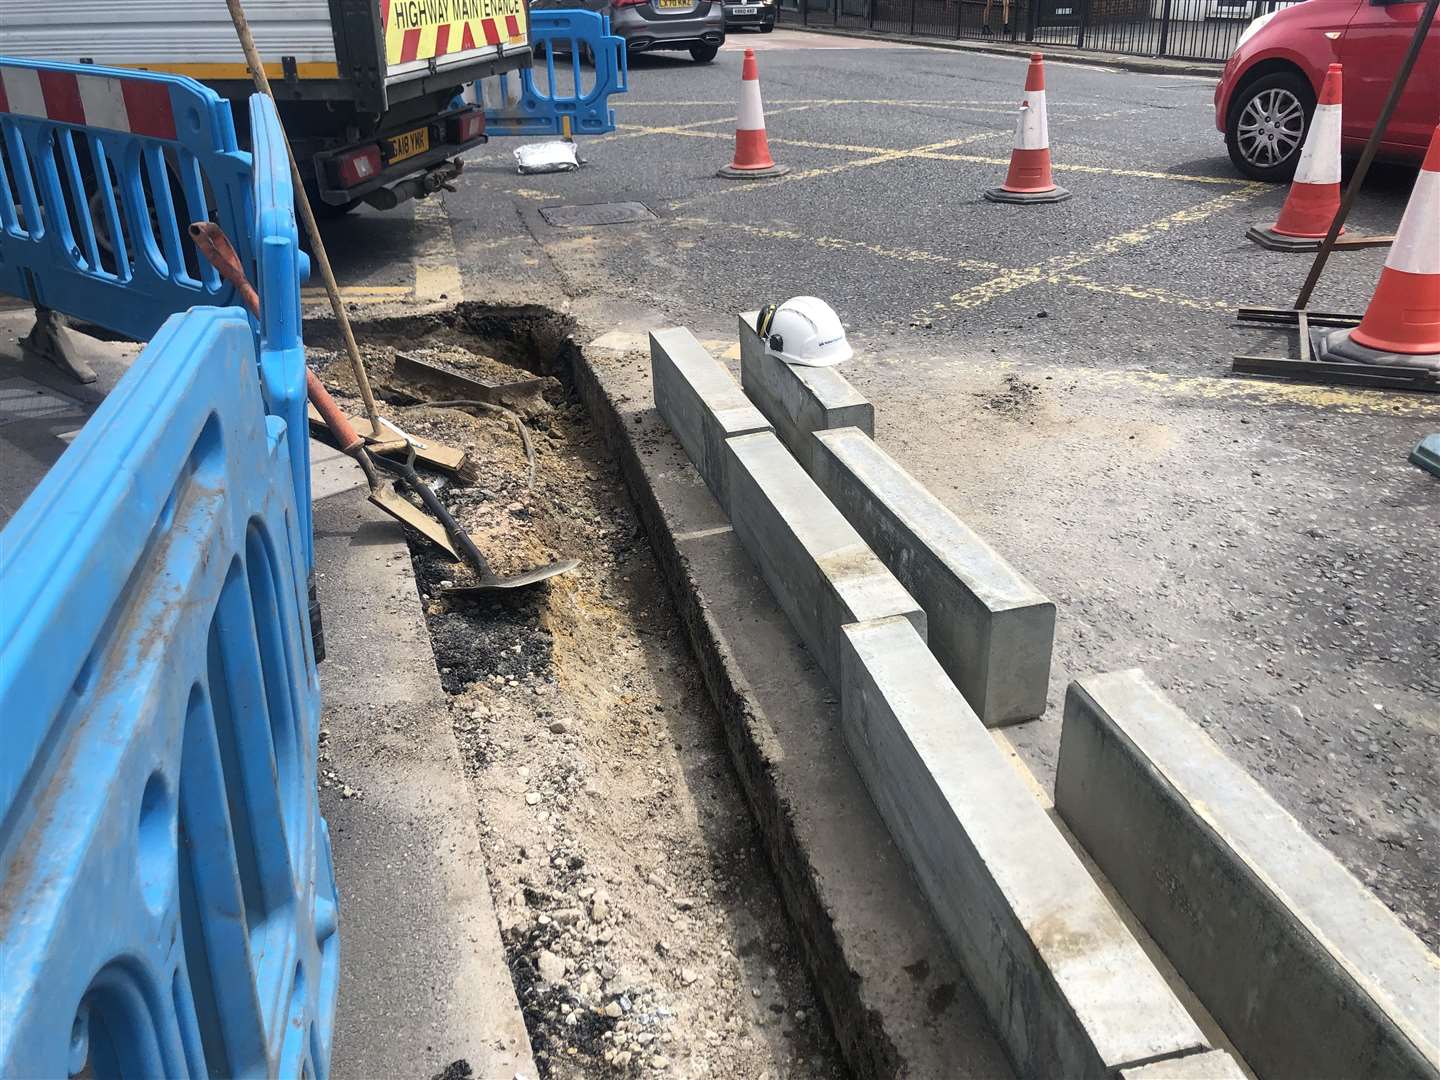 The bell bollard has been removed